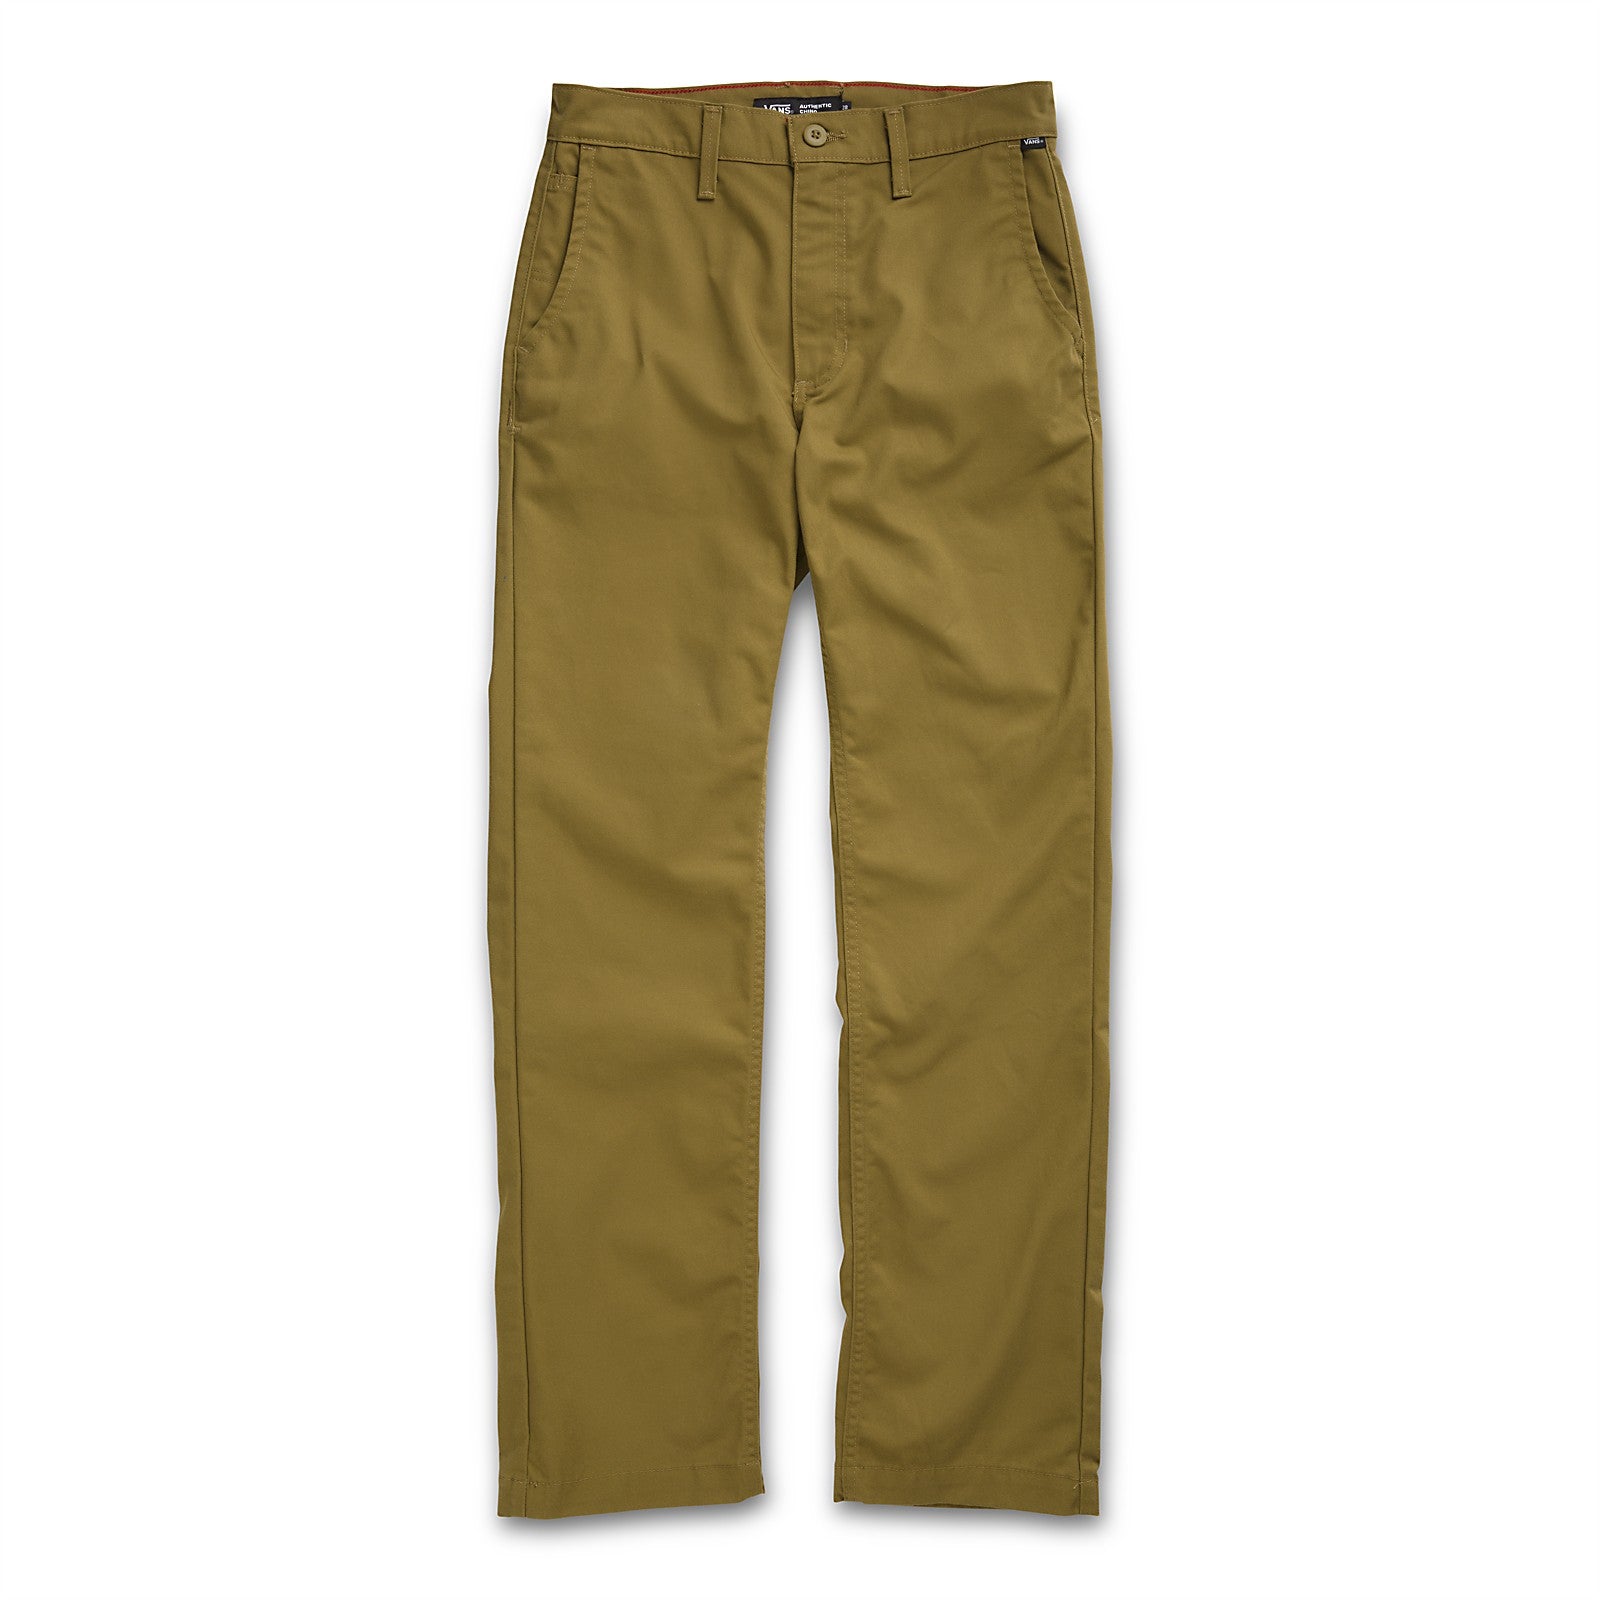 Nutria Relaxed Authentic Vans Chino Pants